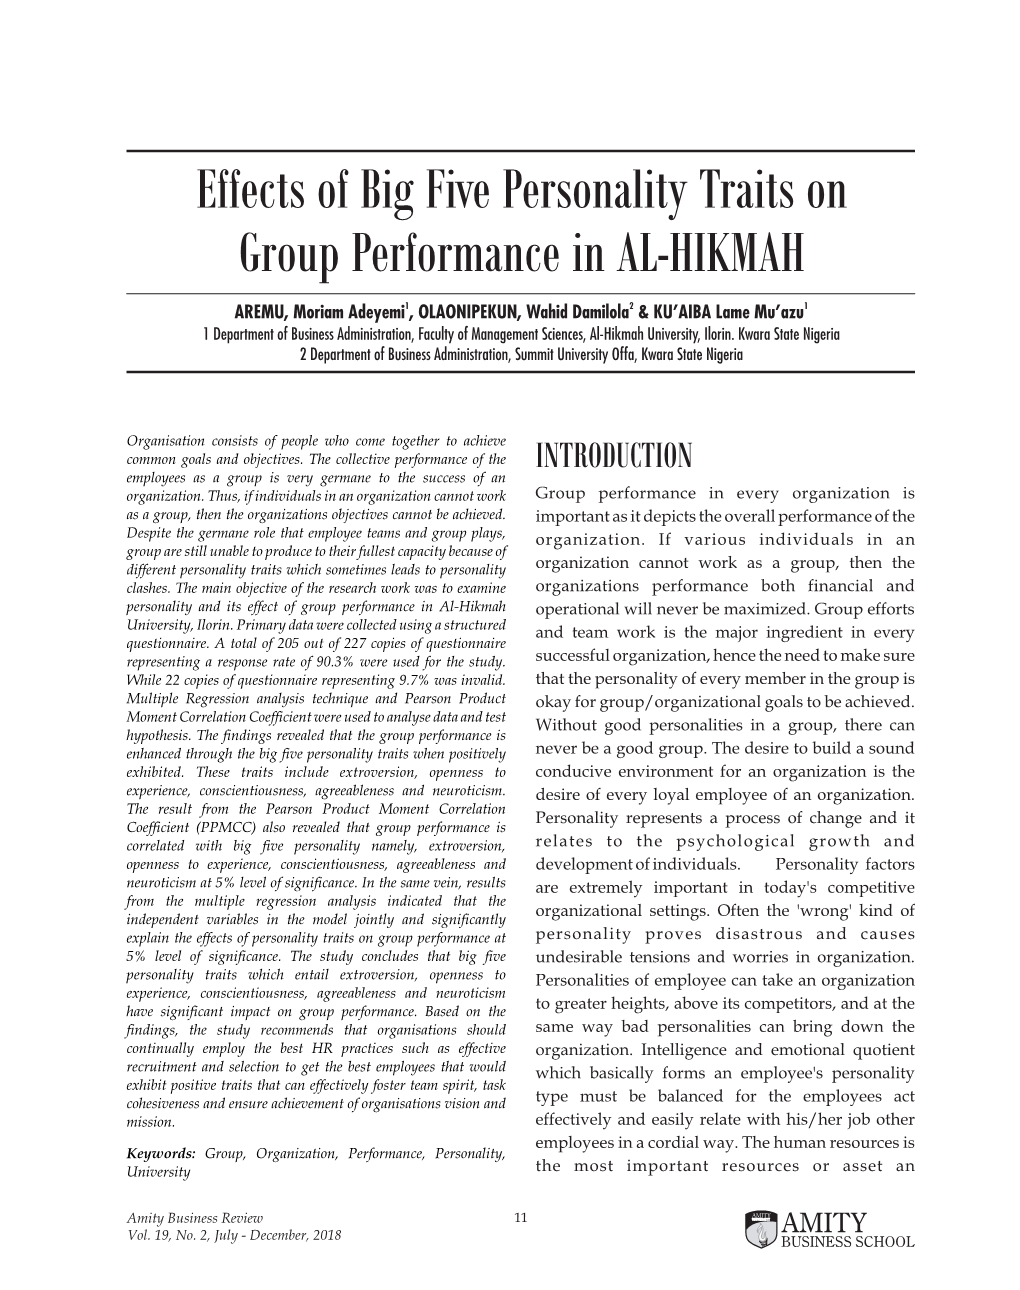 Effects of Big Five Personality Traits on Group Performance in AL-HIKMAH